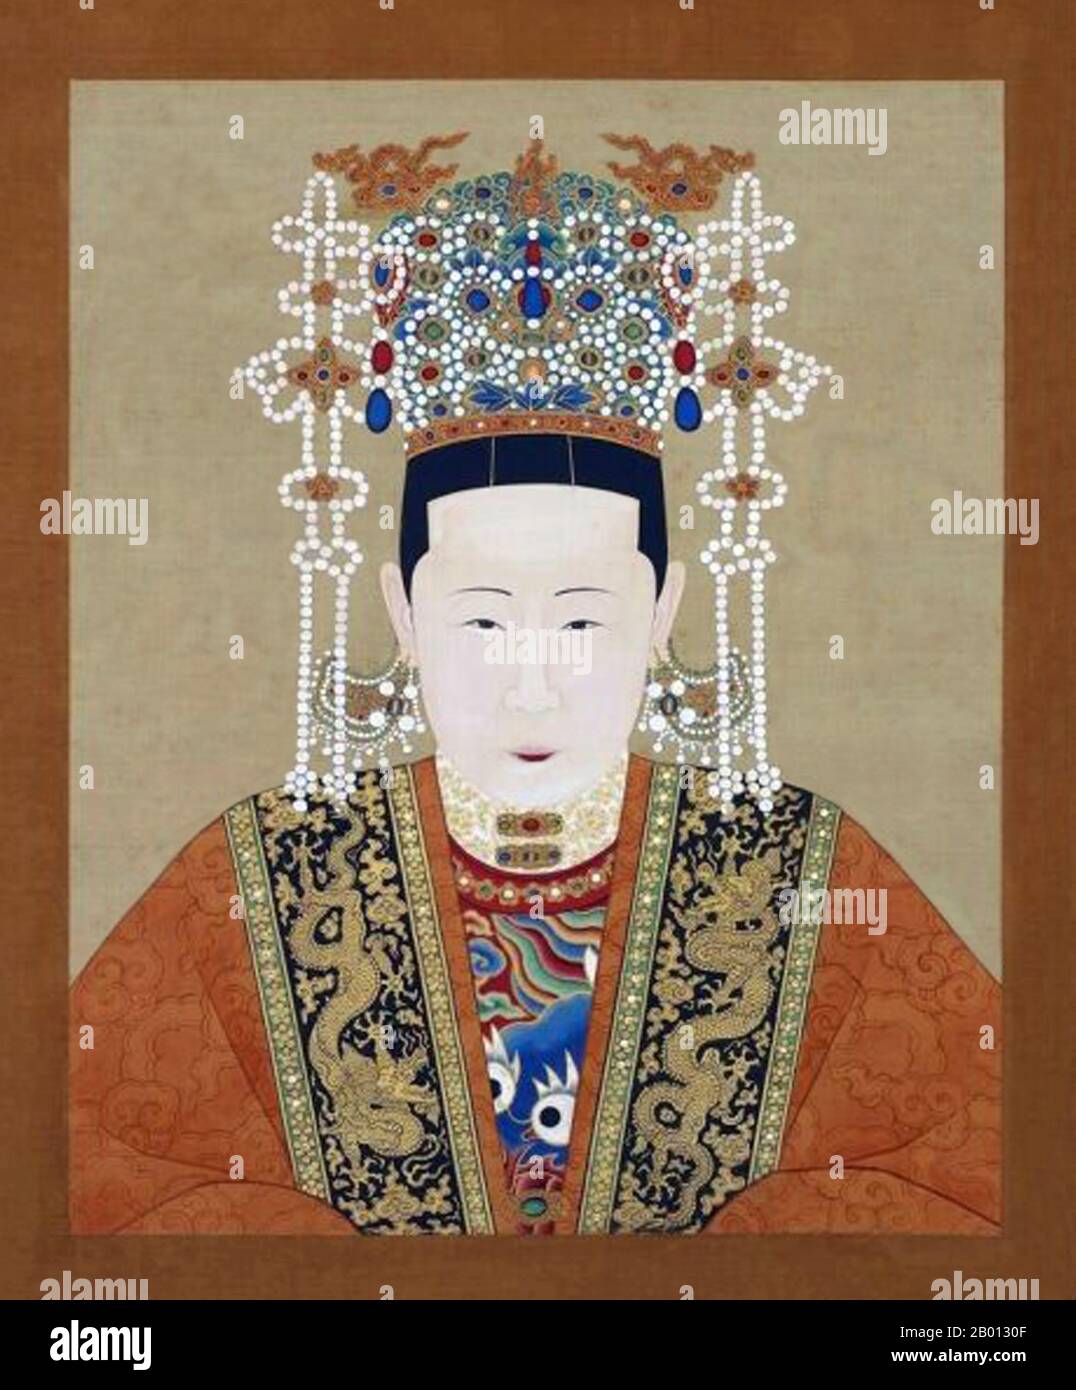 China: Empress Xiao Cheng Jing (1471-1541), consort of the 10th Ming Emperor Hongzhi (r. 1487-1505). Hanging scroll painting, 15th-17th century.  Empress Dowager Zhang (1471-1541), formally Empress Xiaochengjing, was the consort of the Hongzhi Emperor and mother of the Zhengde Emperor (r. 1505-1521) of the Ming Dynasty. Her husband Hongzhi was the only emperor in Chinese history to have been monogamous, having no concubines and being solely dedicated to her. She was said to have been vain, demanding and materialistic, and handed out limitless favours to her own family members. Stock Photo